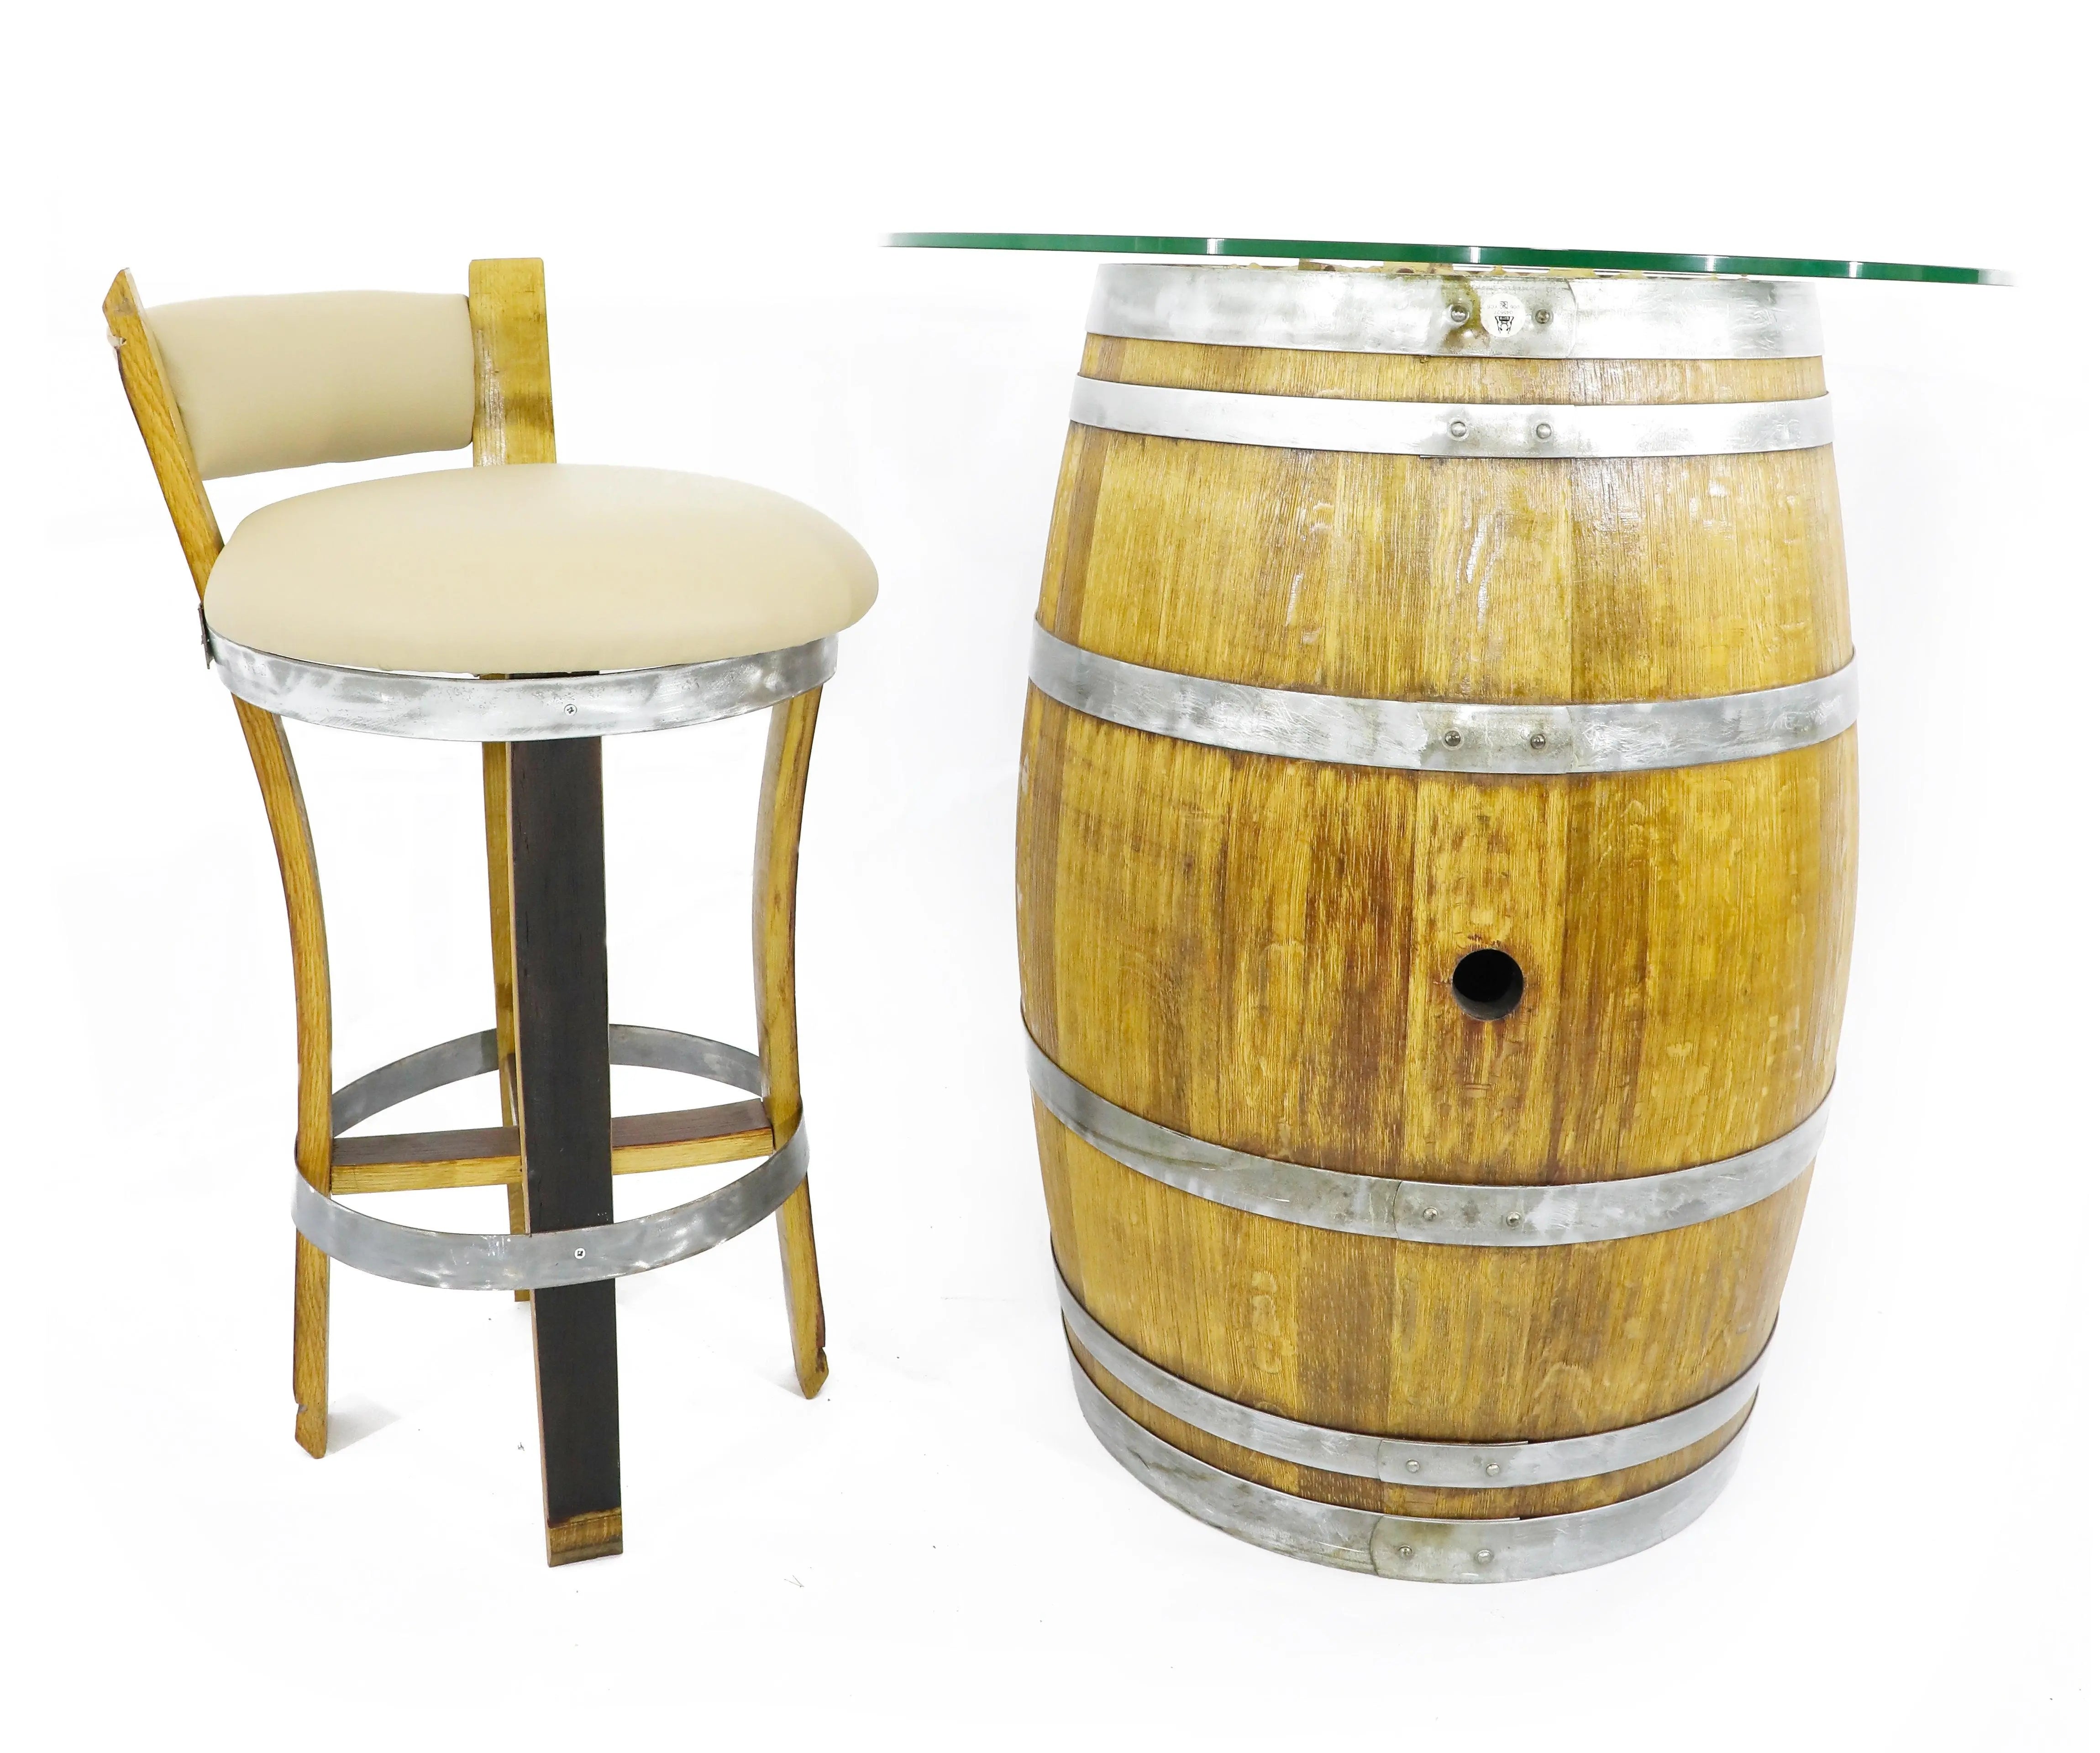 2 Pack x Off-White Stave Bar Stool With Backrest - Oak Wood Wine Barrels. wine barrel coffee table barrel glass top wine barrel glass top whiskey barrel glass top bourbon barrel glass top barrel coffee table barrel wine rack wine barrel table whiskey barrel whiskey barrel table wine barrel handma